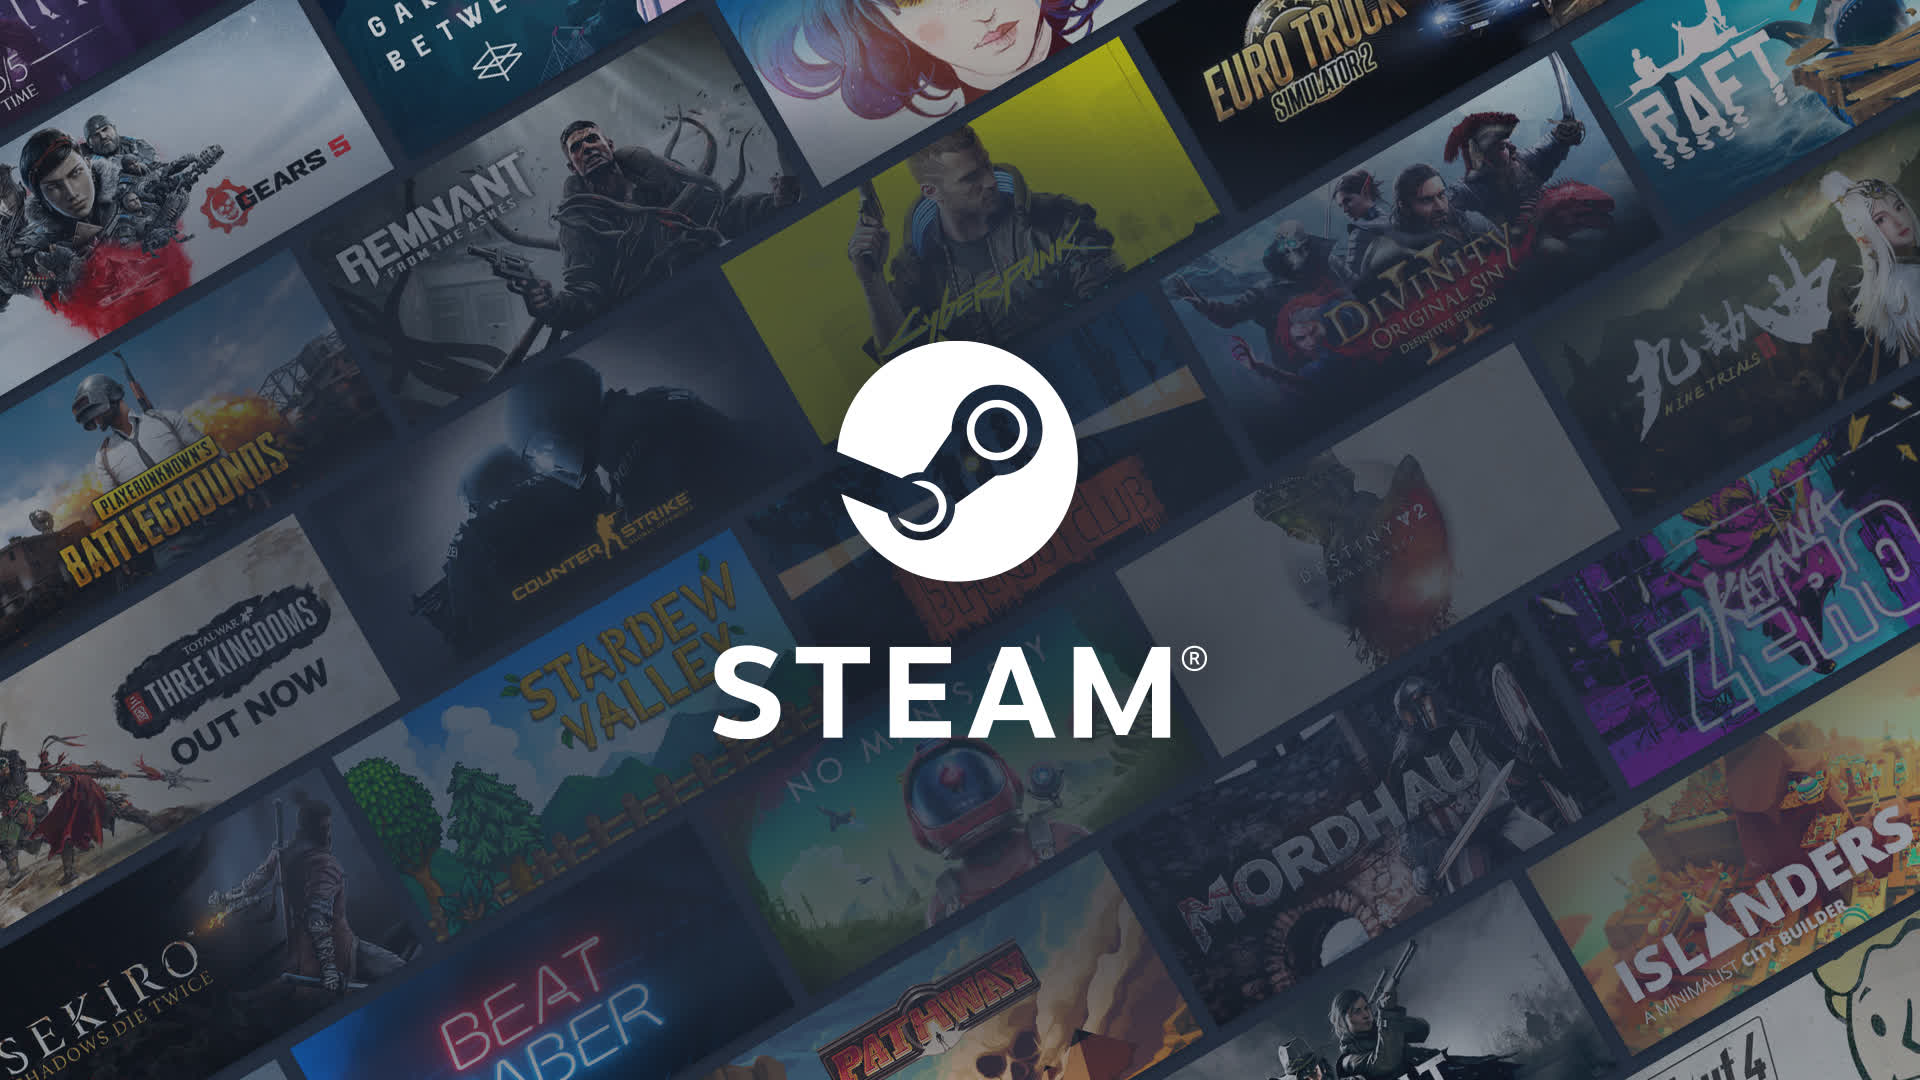 Steam saw a record 30 million concurrent users over the weekend